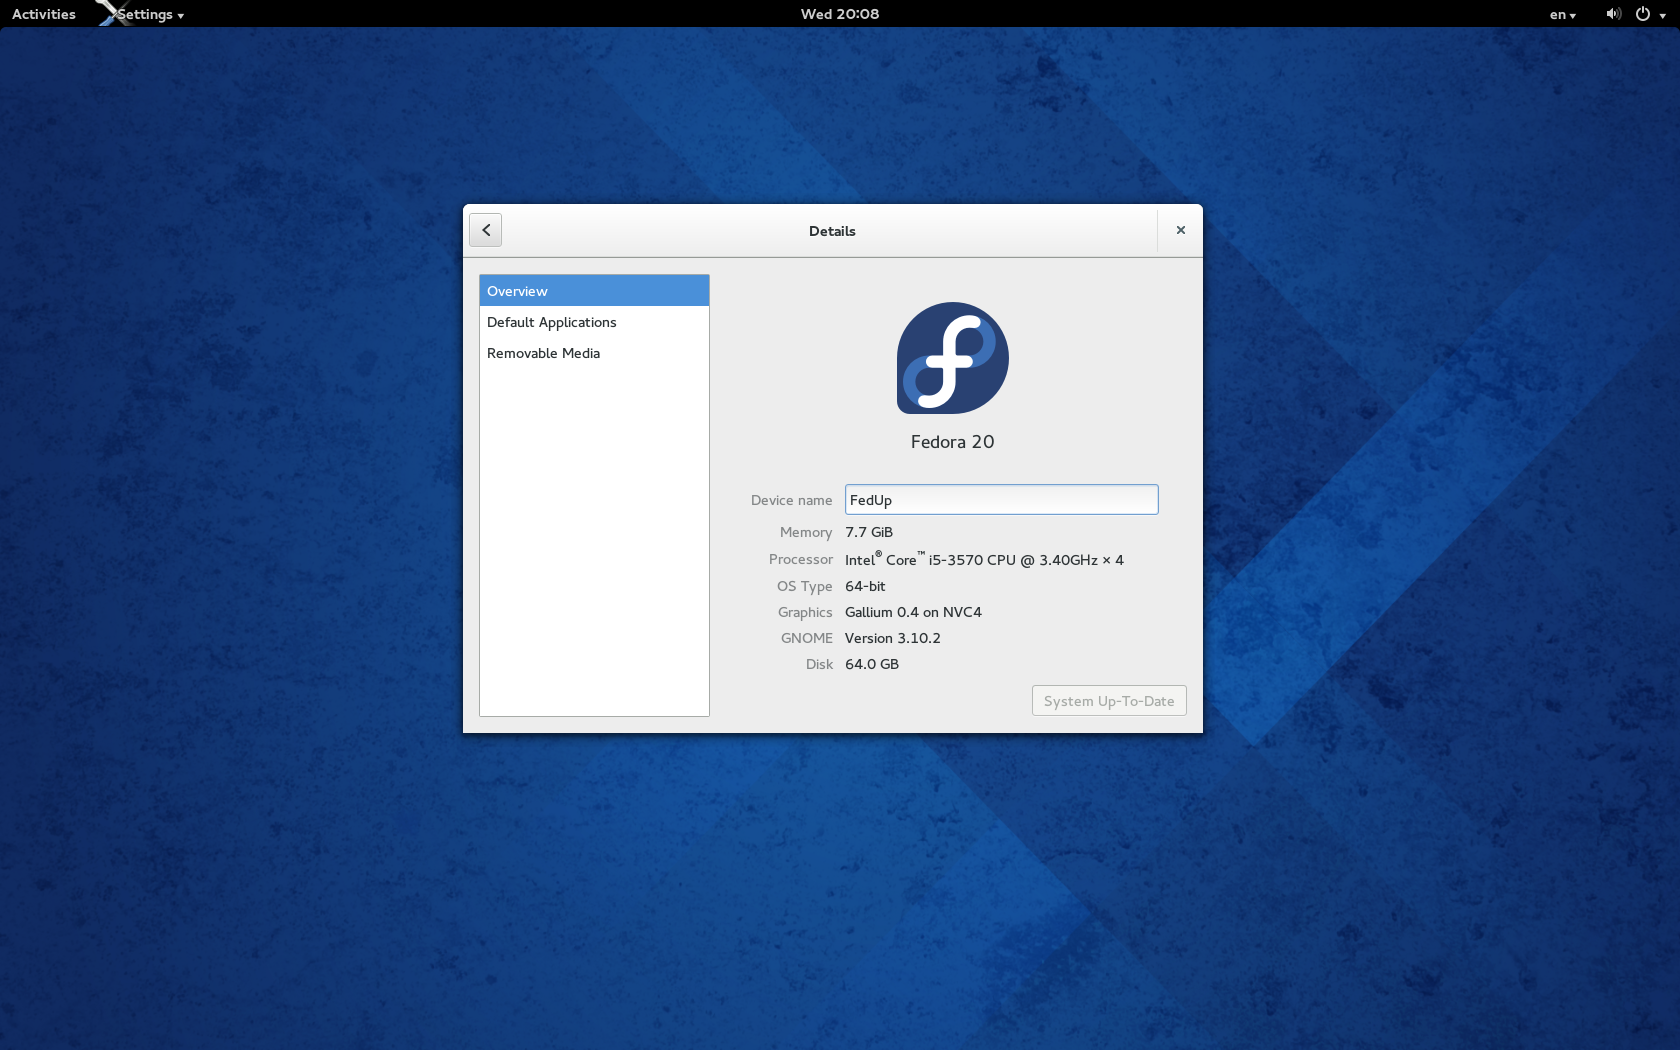 rufus syslinux 6.04 download fedora